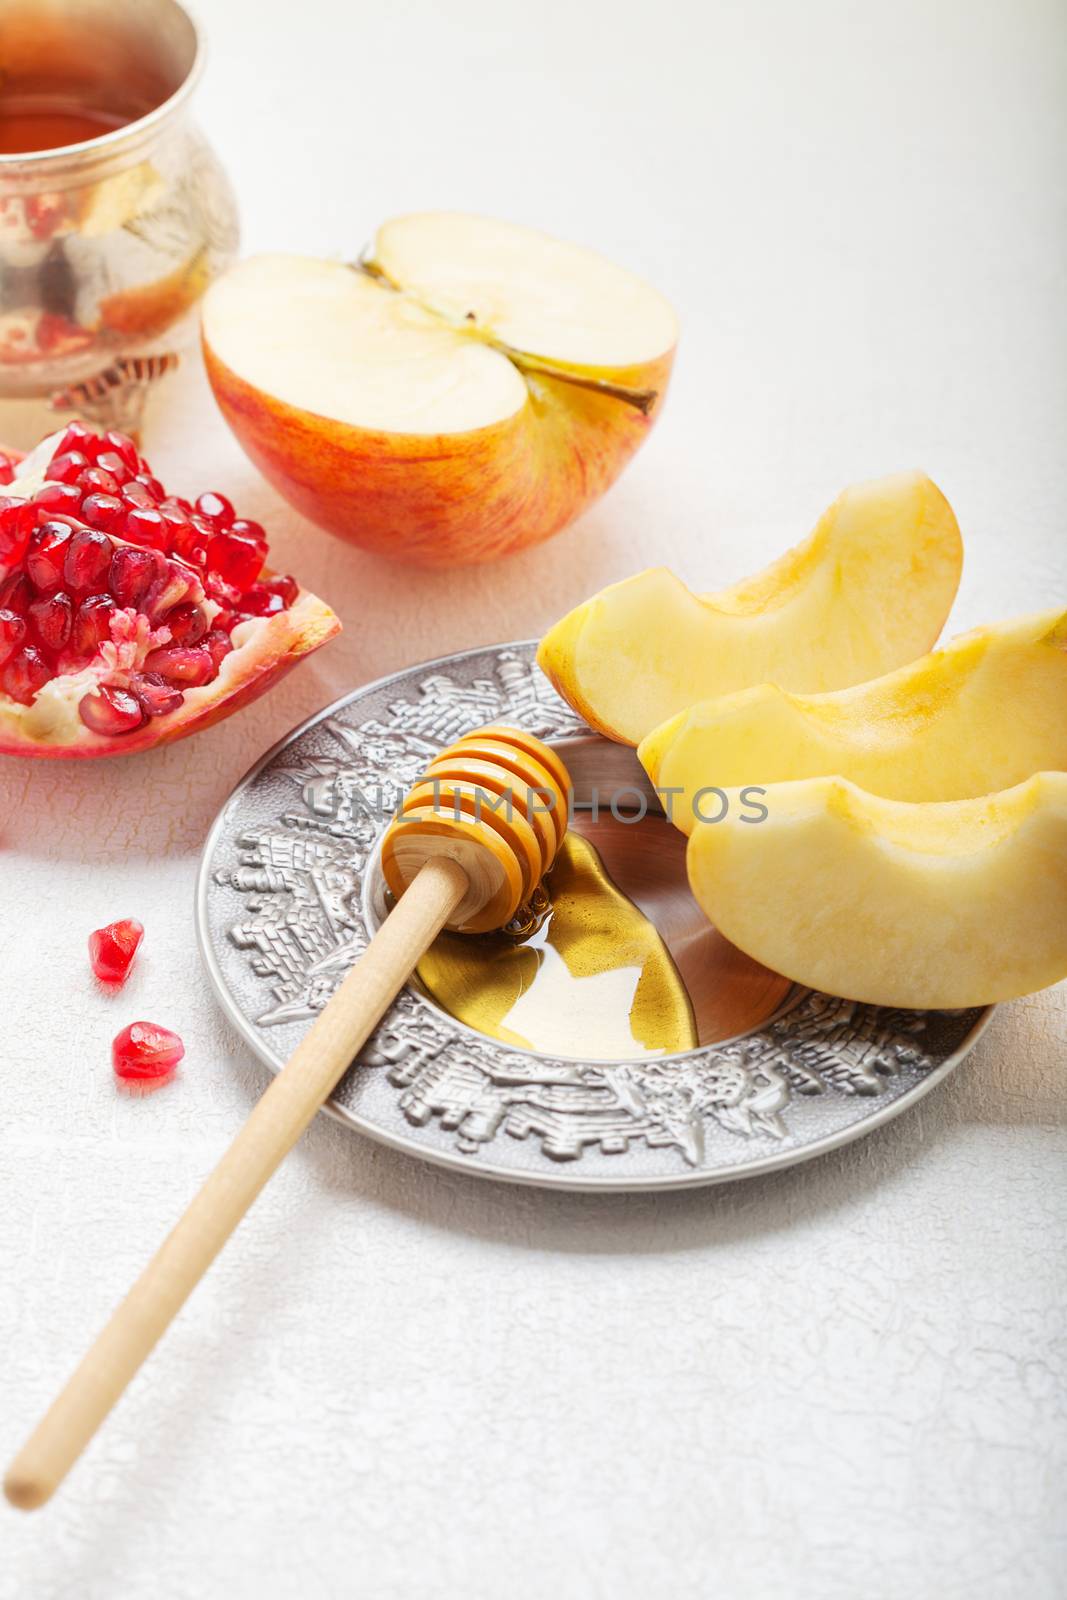 Apples, pomegranate and honey for Rosh Hashanah  by supercat67